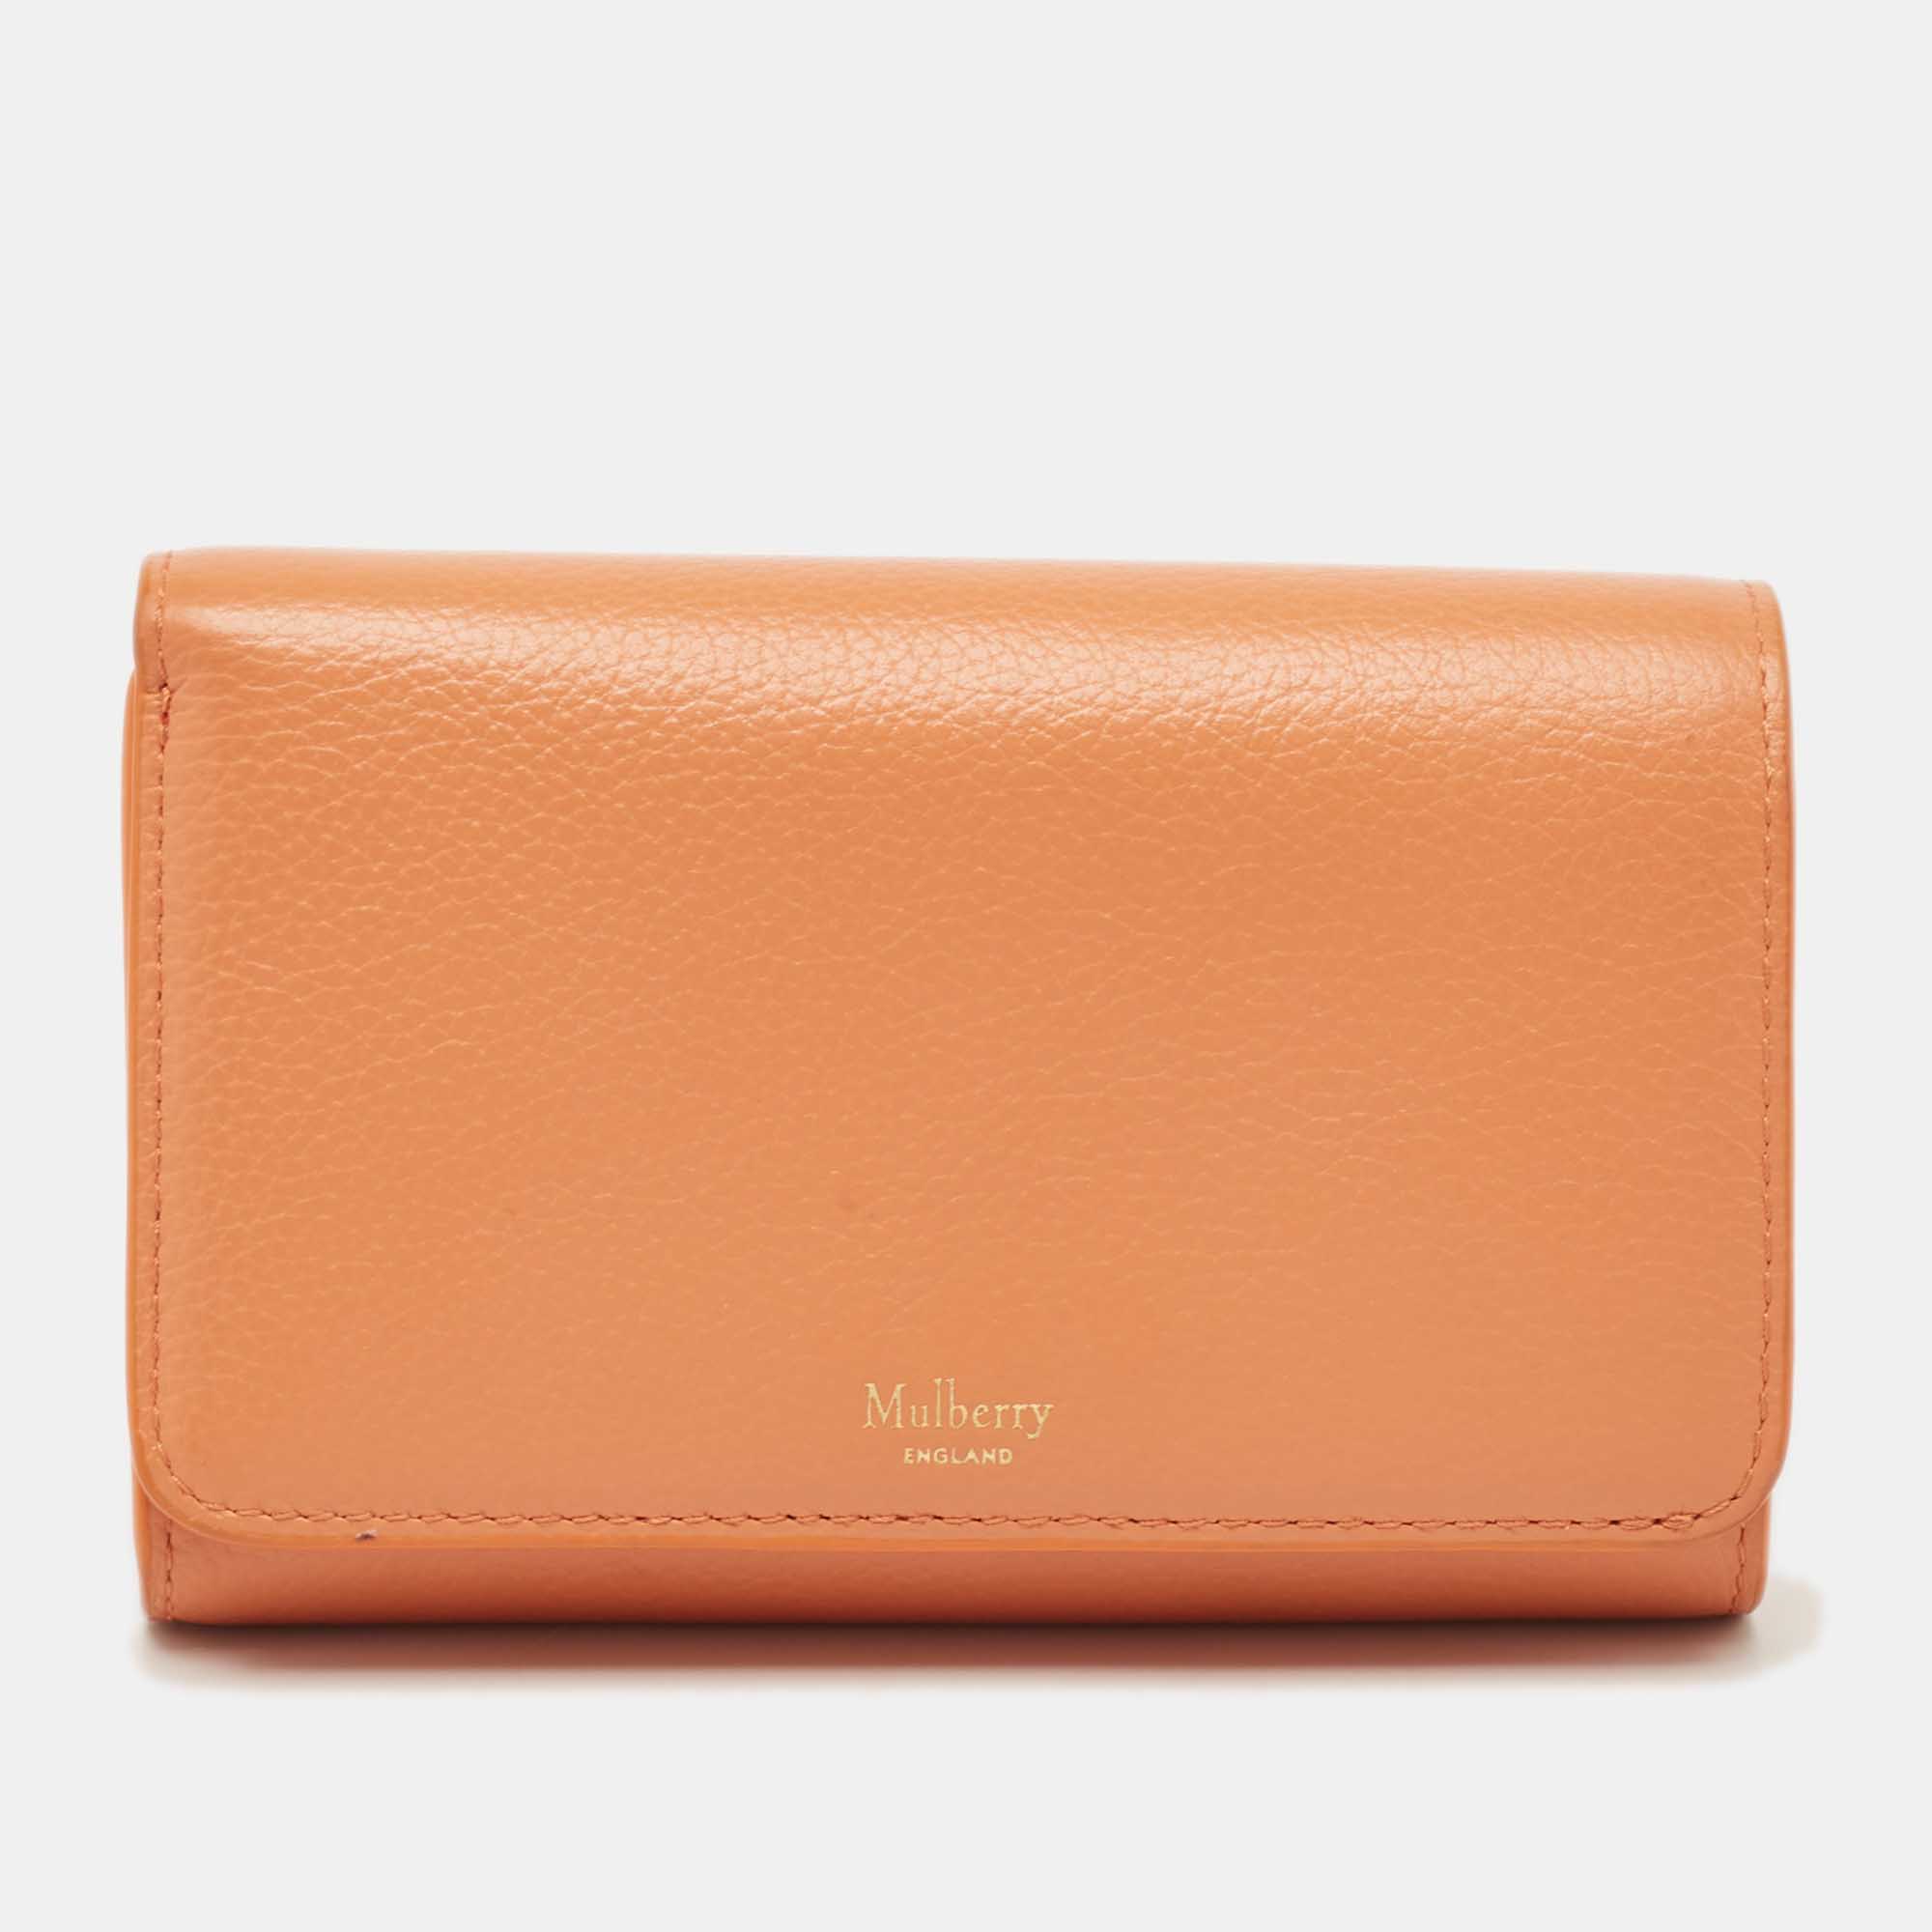 Mulberry orange leather flap continental wallet